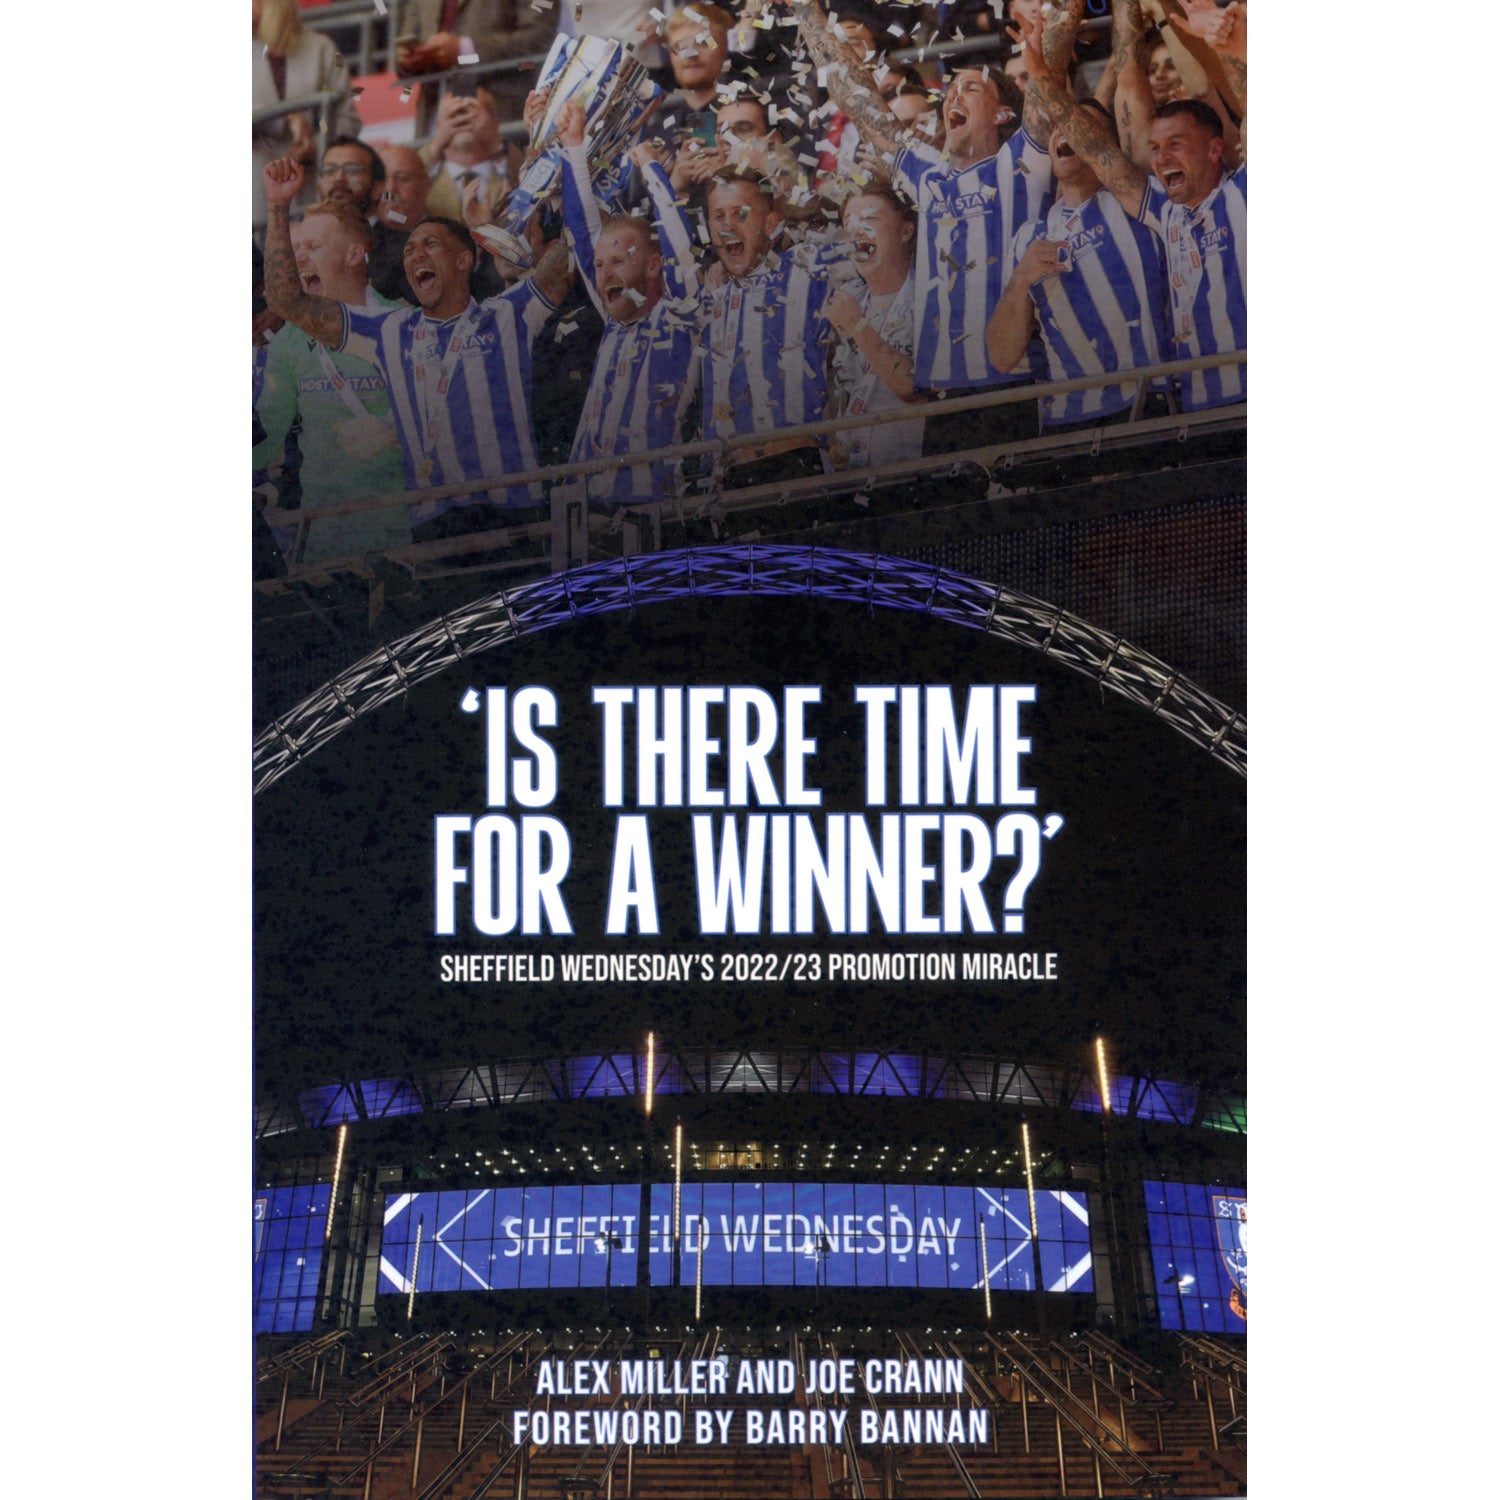 Is there time for a winner? Sheffield Wednesday's 2022/23 Promotion Miracle